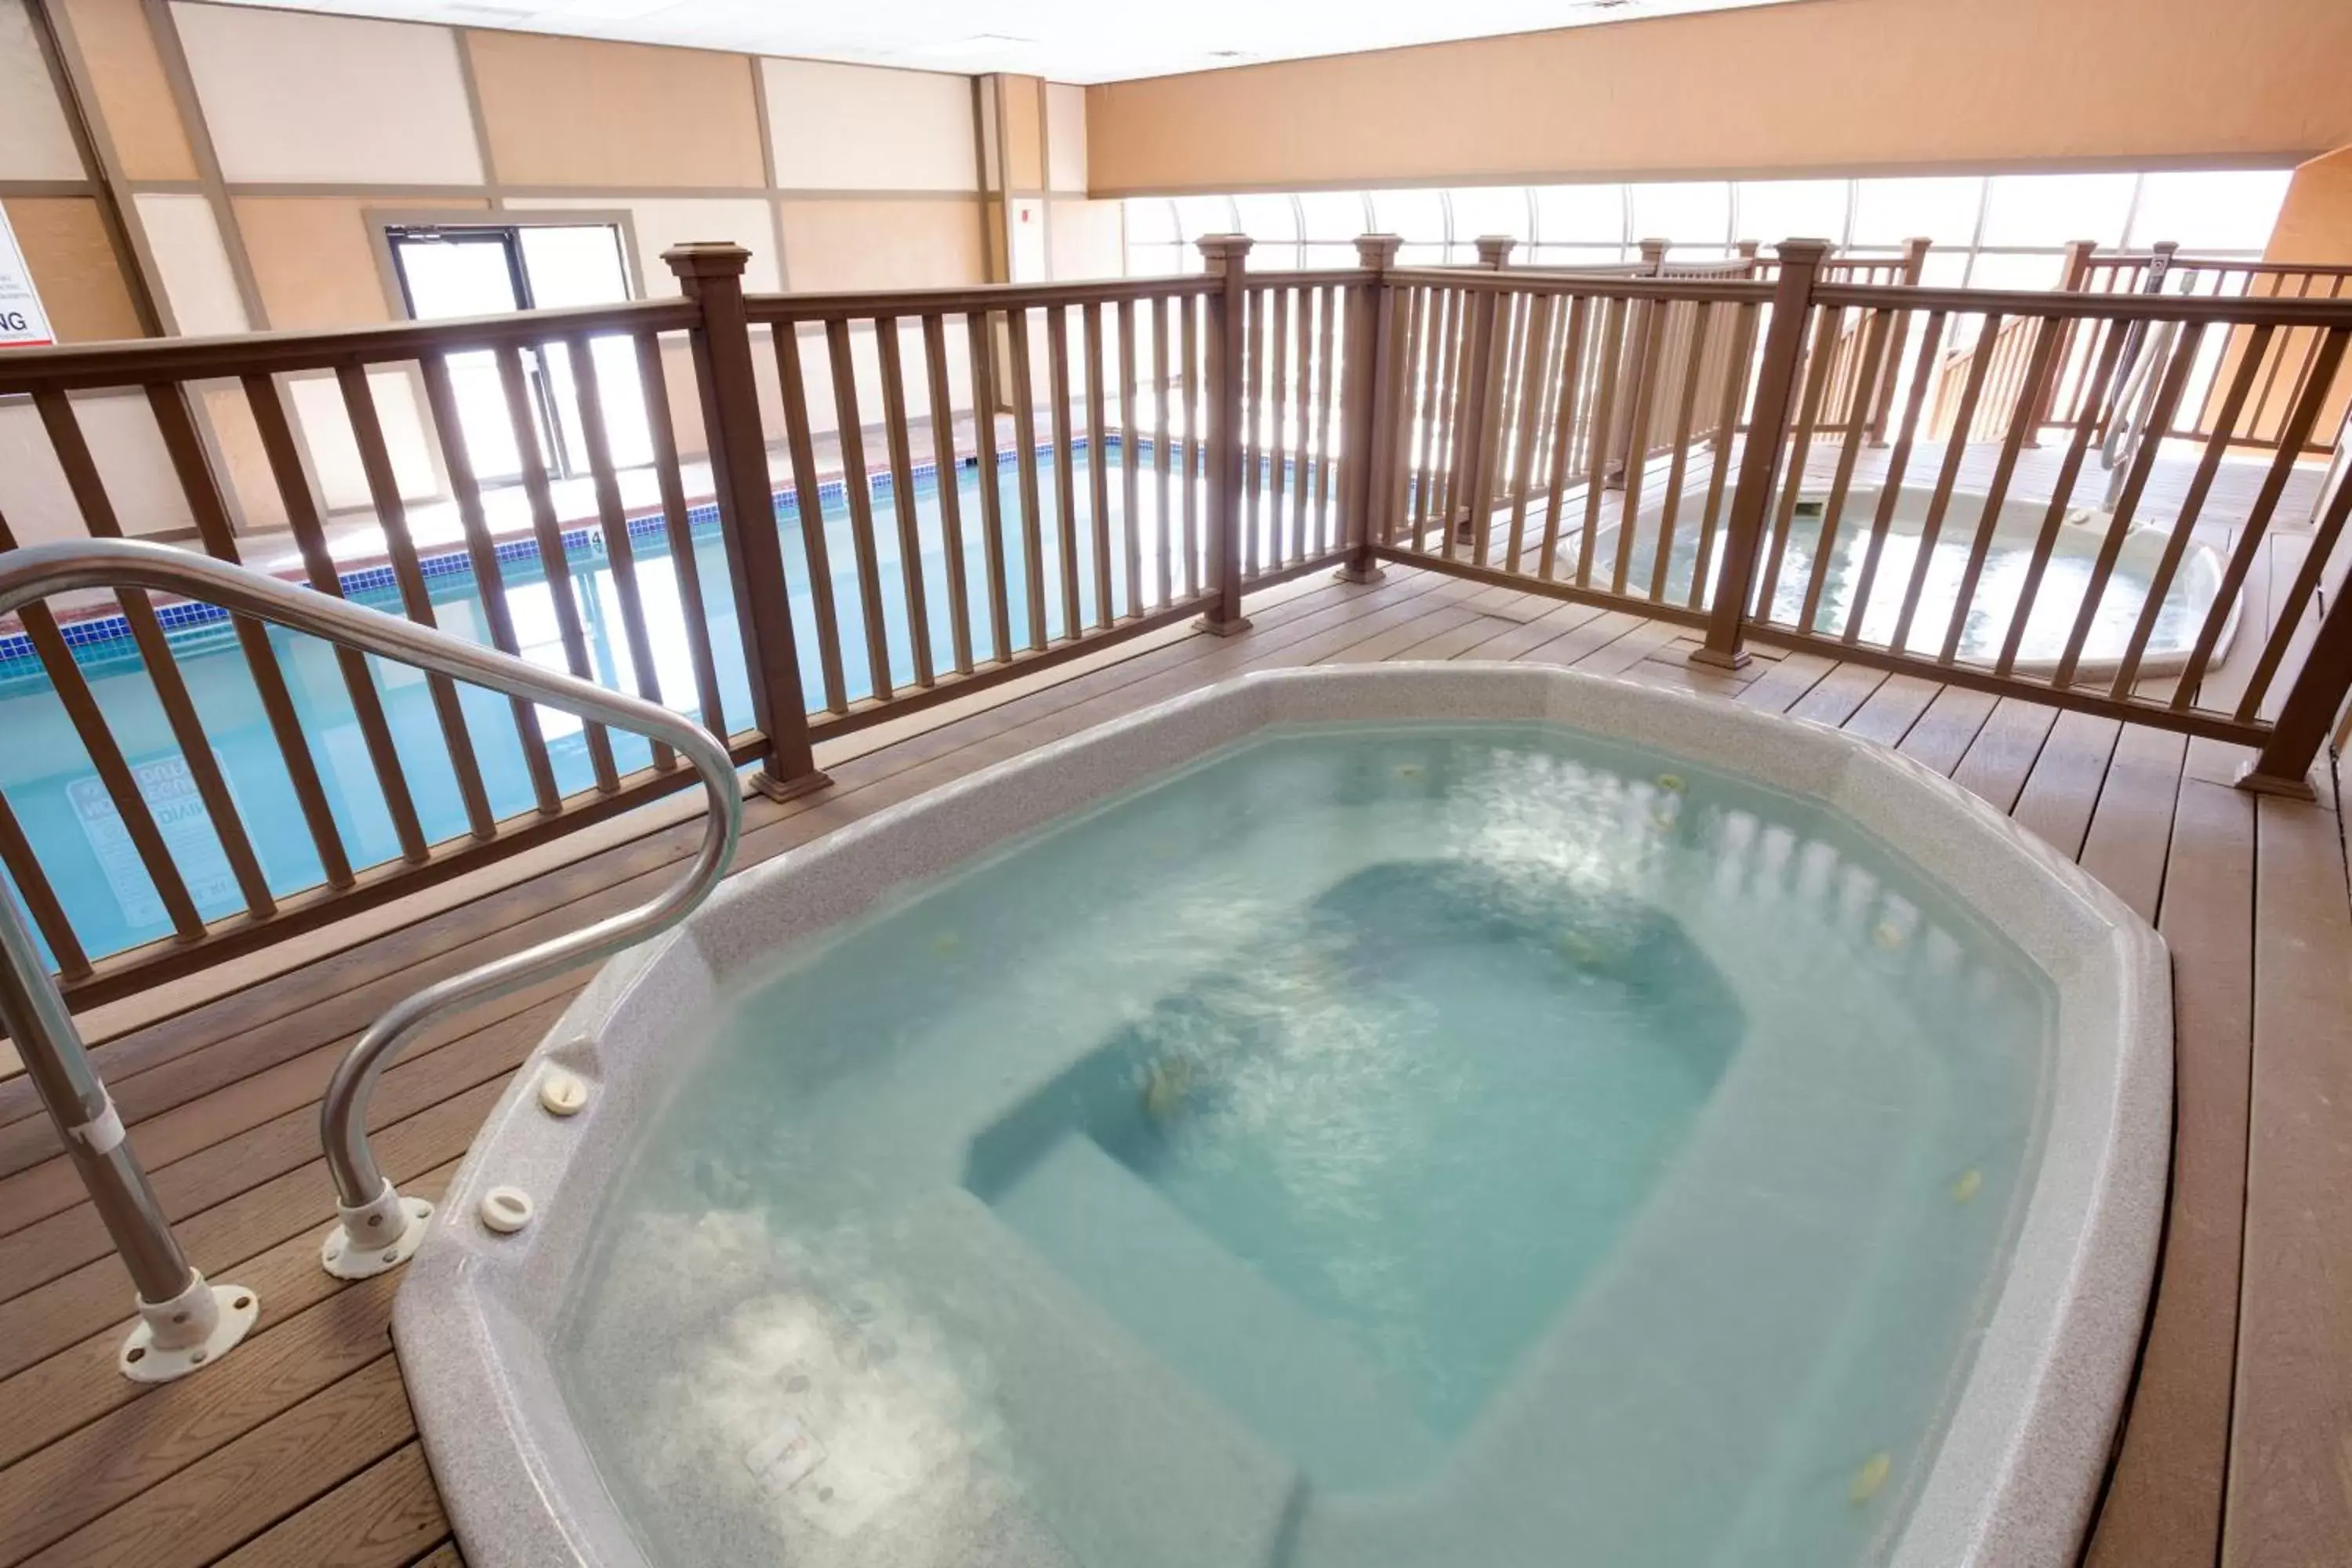 Swimming Pool in Legacy Vacation Resorts Steamboat Springs Hilltop